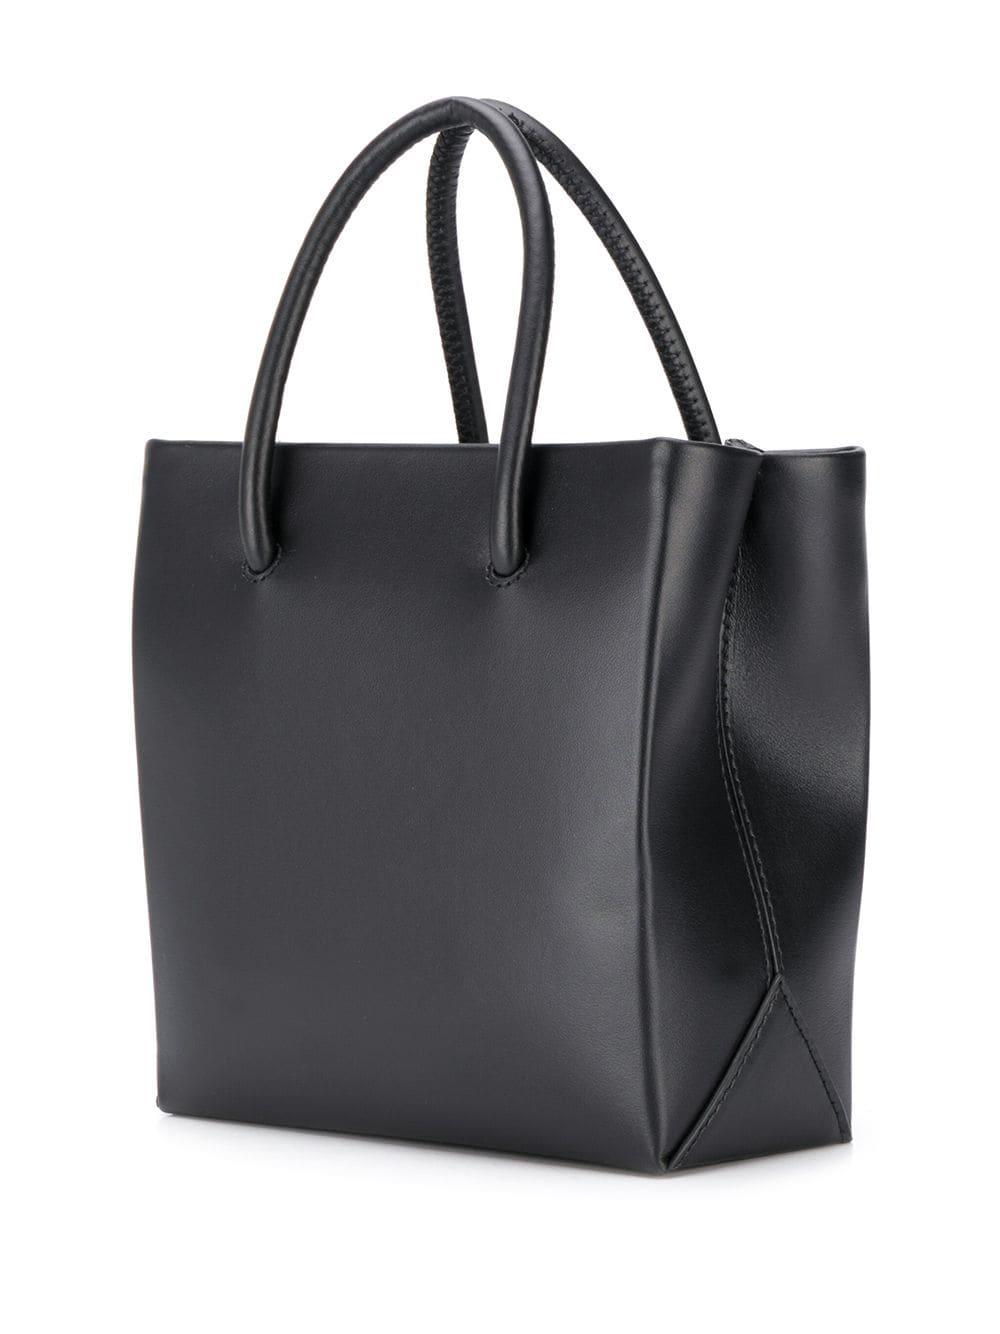 Moschino Leather Mini Logo Tote Bag in Black - Save 57% - Lyst